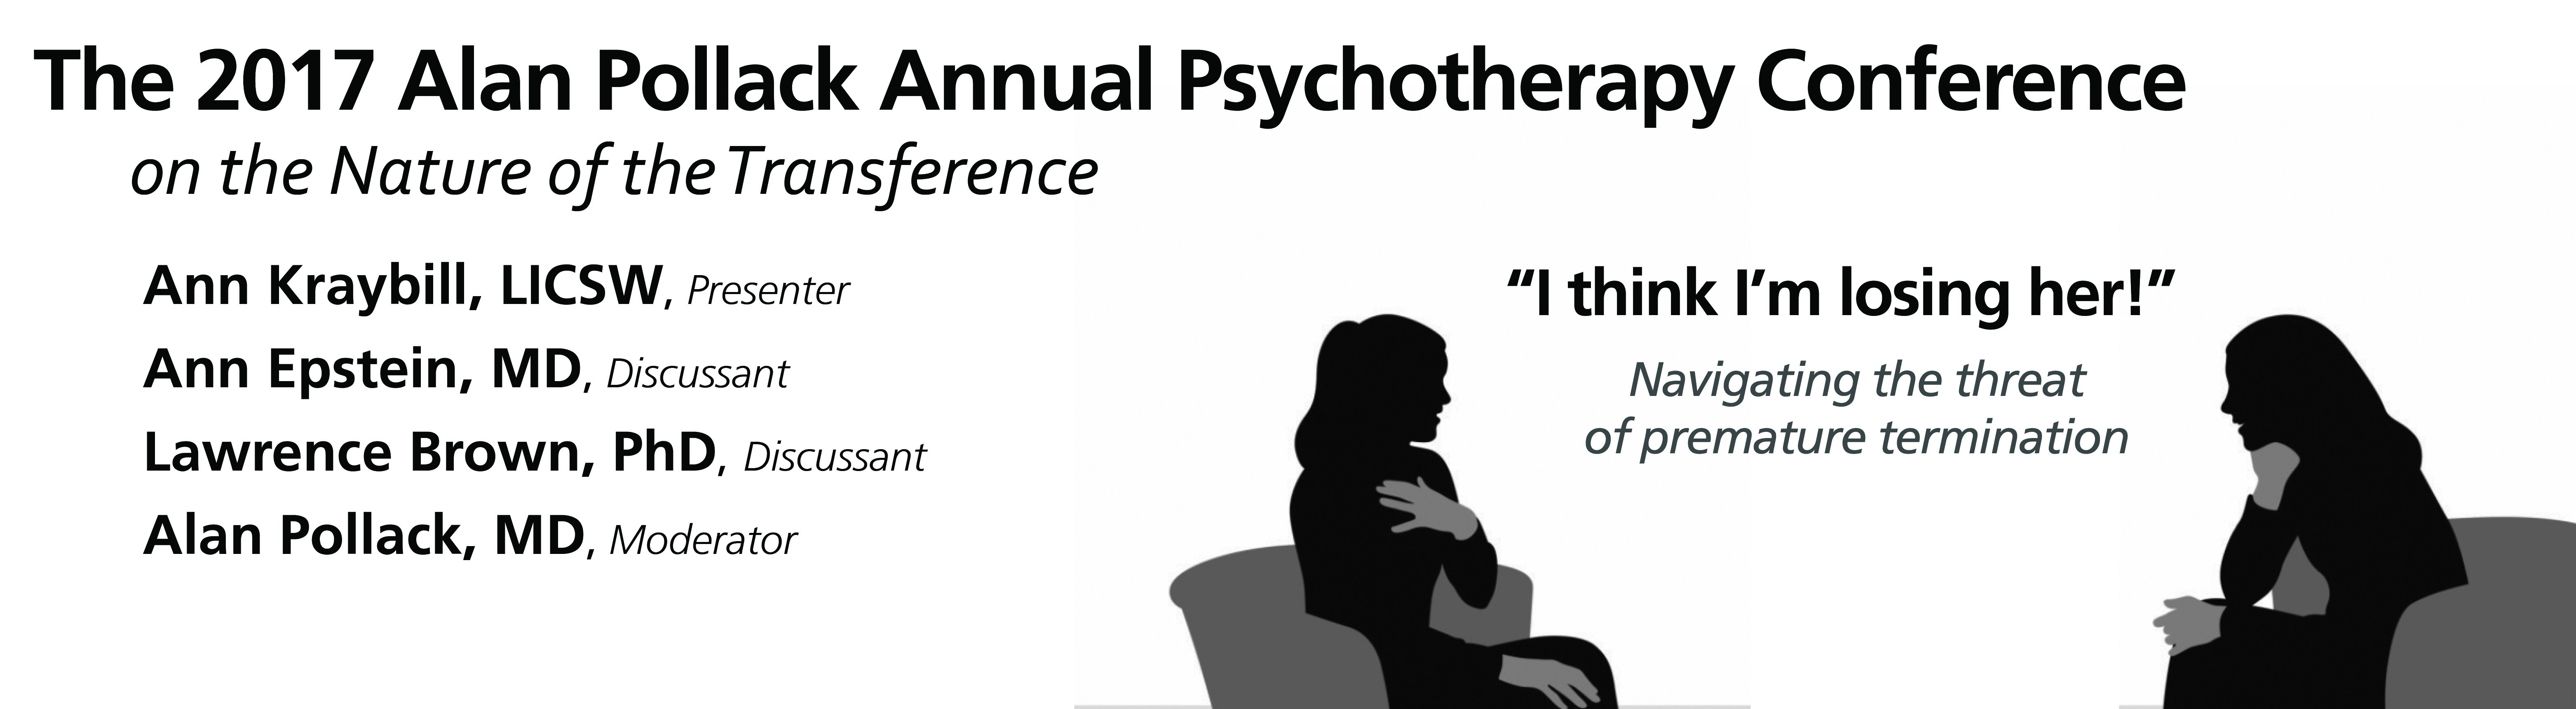 Psychotherapy Conference 2017